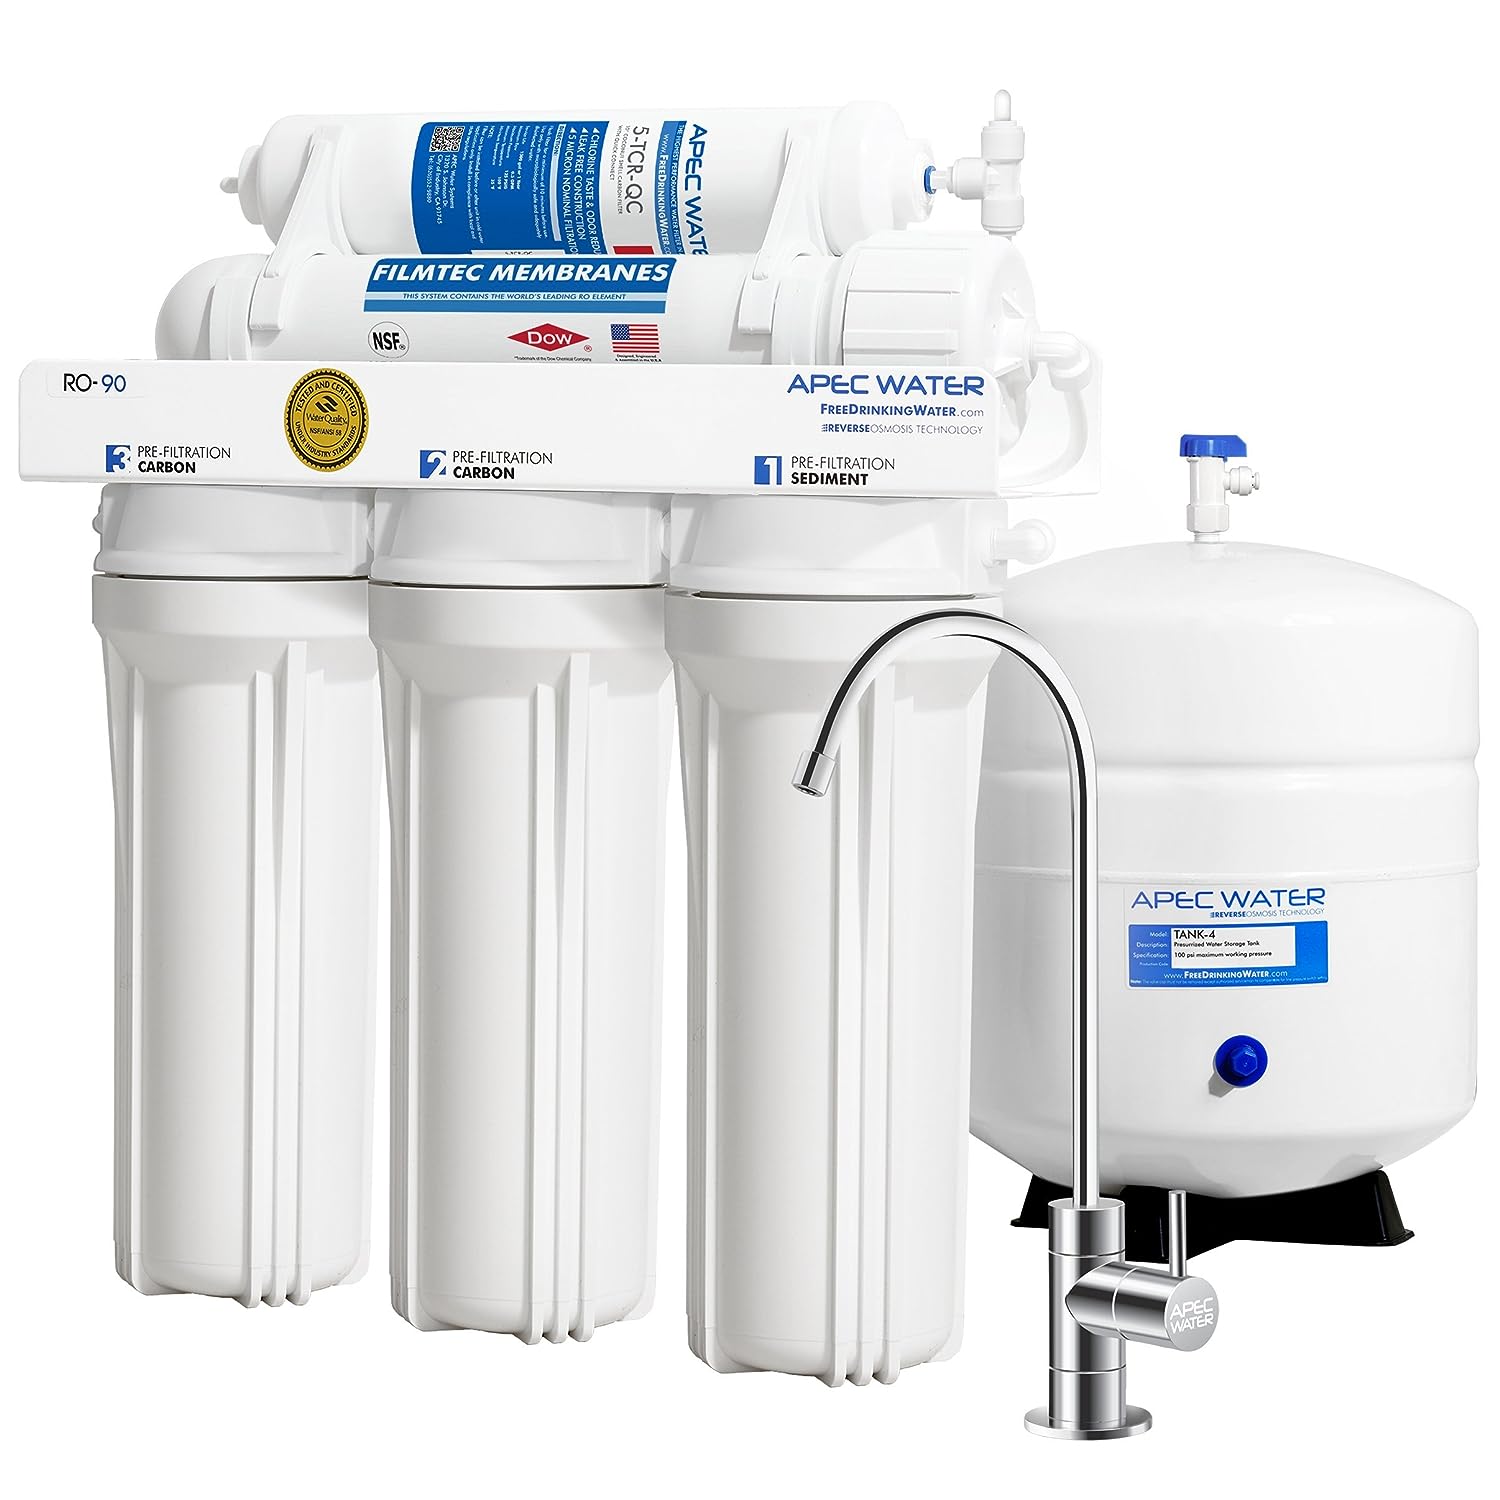 APEC Reverse Osmosis Drinking Water Filter System